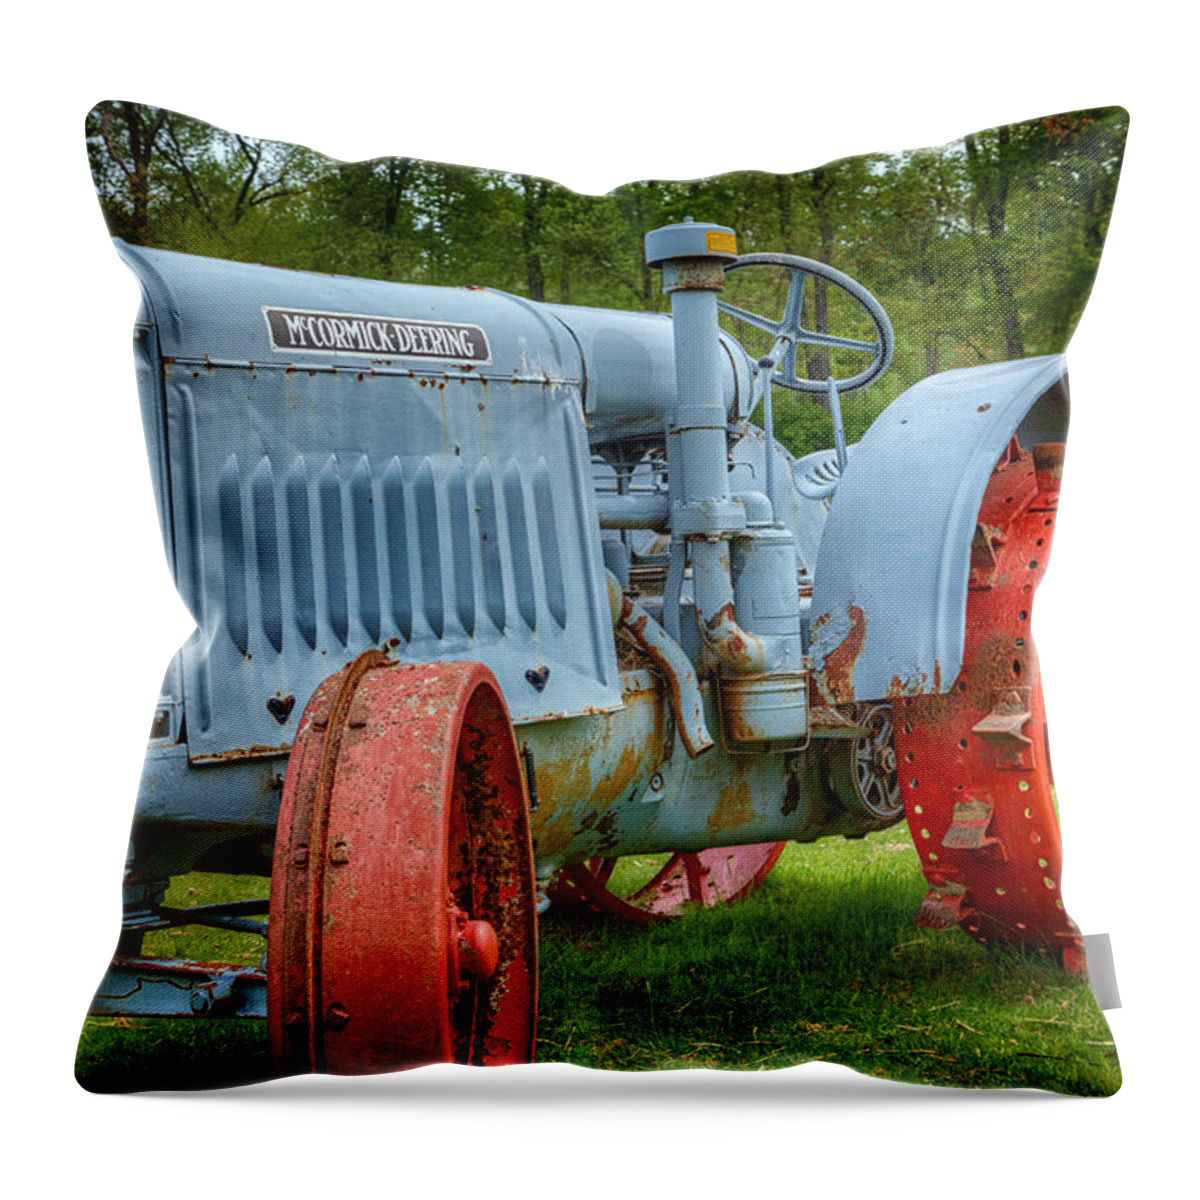 John Deere Throw Pillow featuring the photograph McCormick Deering by Bill Wakeley